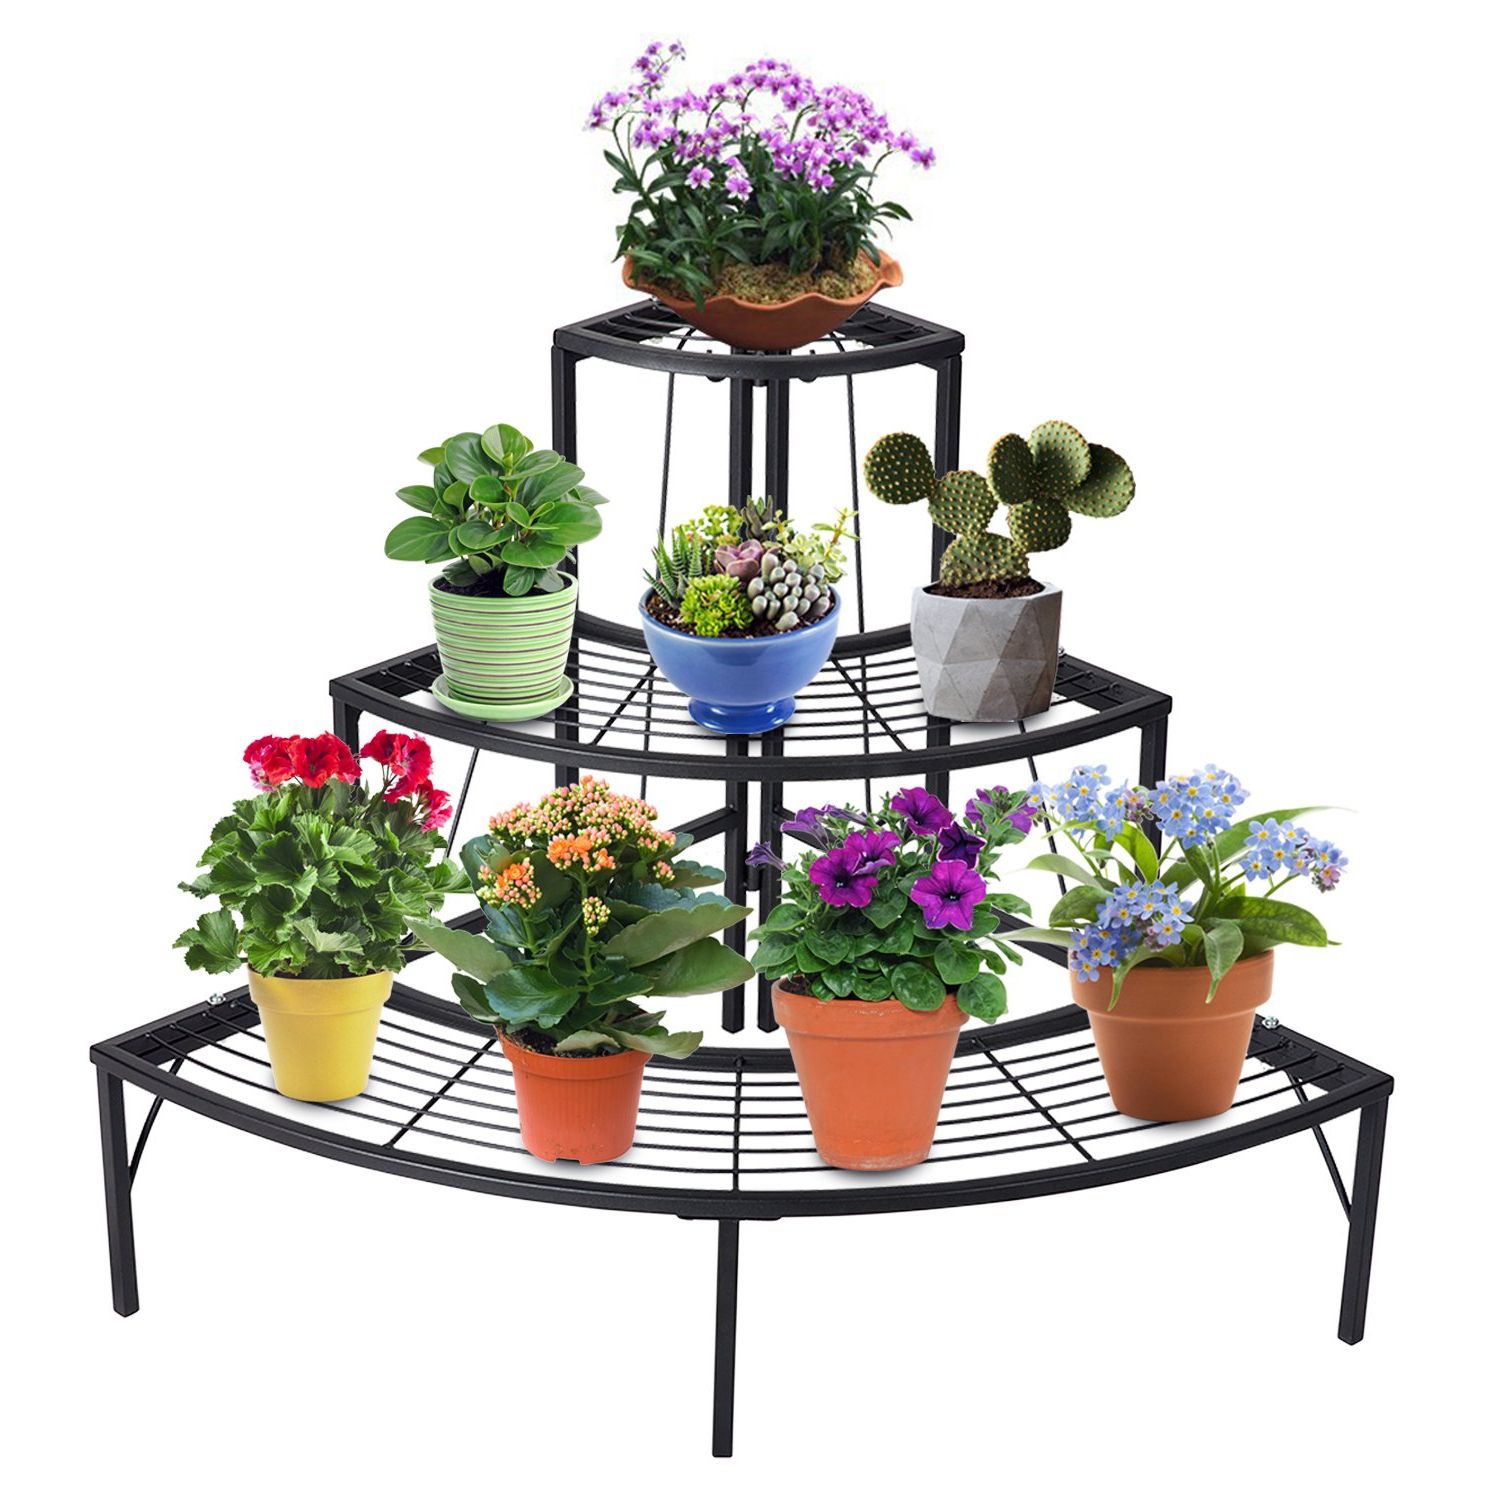 Round Plant Stands Intended For Most Current Amazon : Doeworks 3 Tier Plant Stand Flower Pot Rack, Quarter Round  Plant Corner Shelf Planters Display Holder Orchid Shelves For Indoor  Outdoor Use, Black : Patio, Lawn & Garden (View 3 of 10)